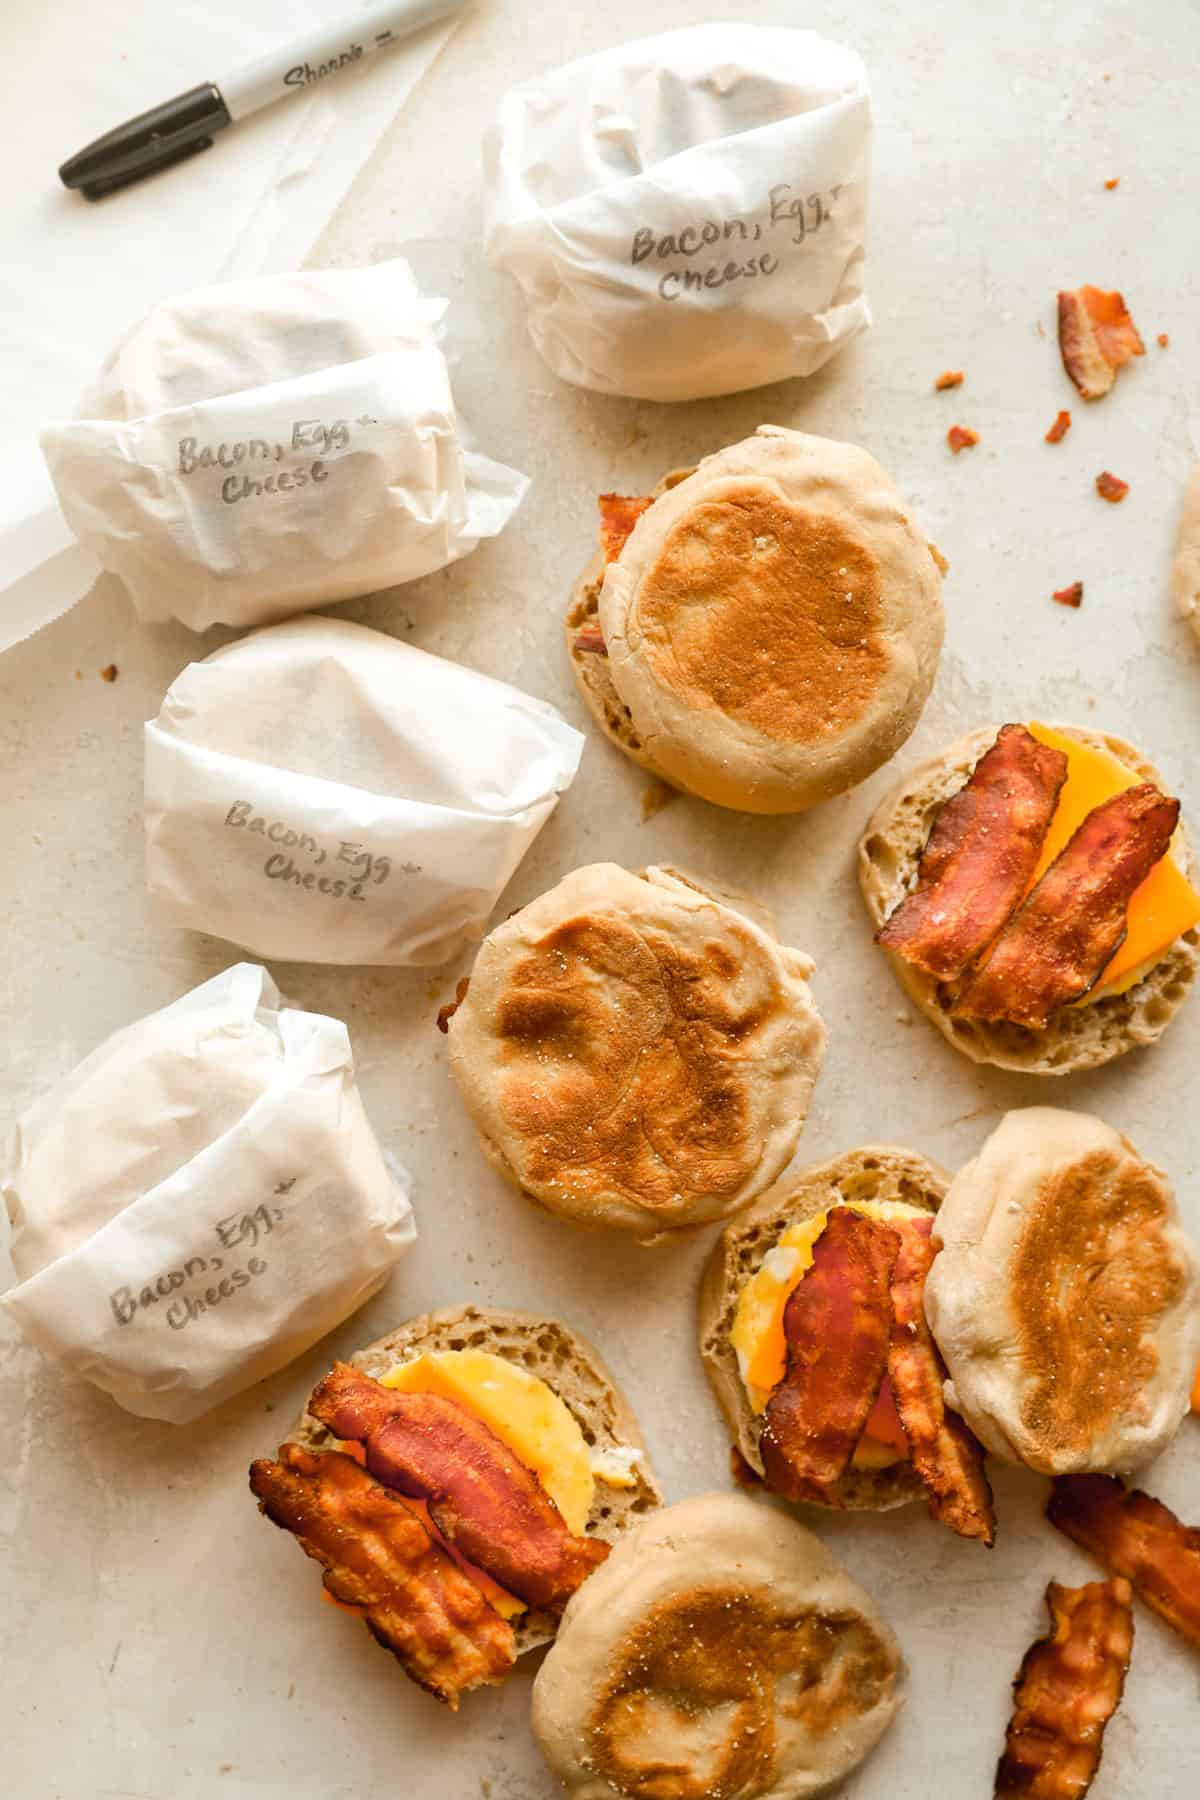 Pictured above is a frozen breakfast sandwich wrapped in parchment paper.